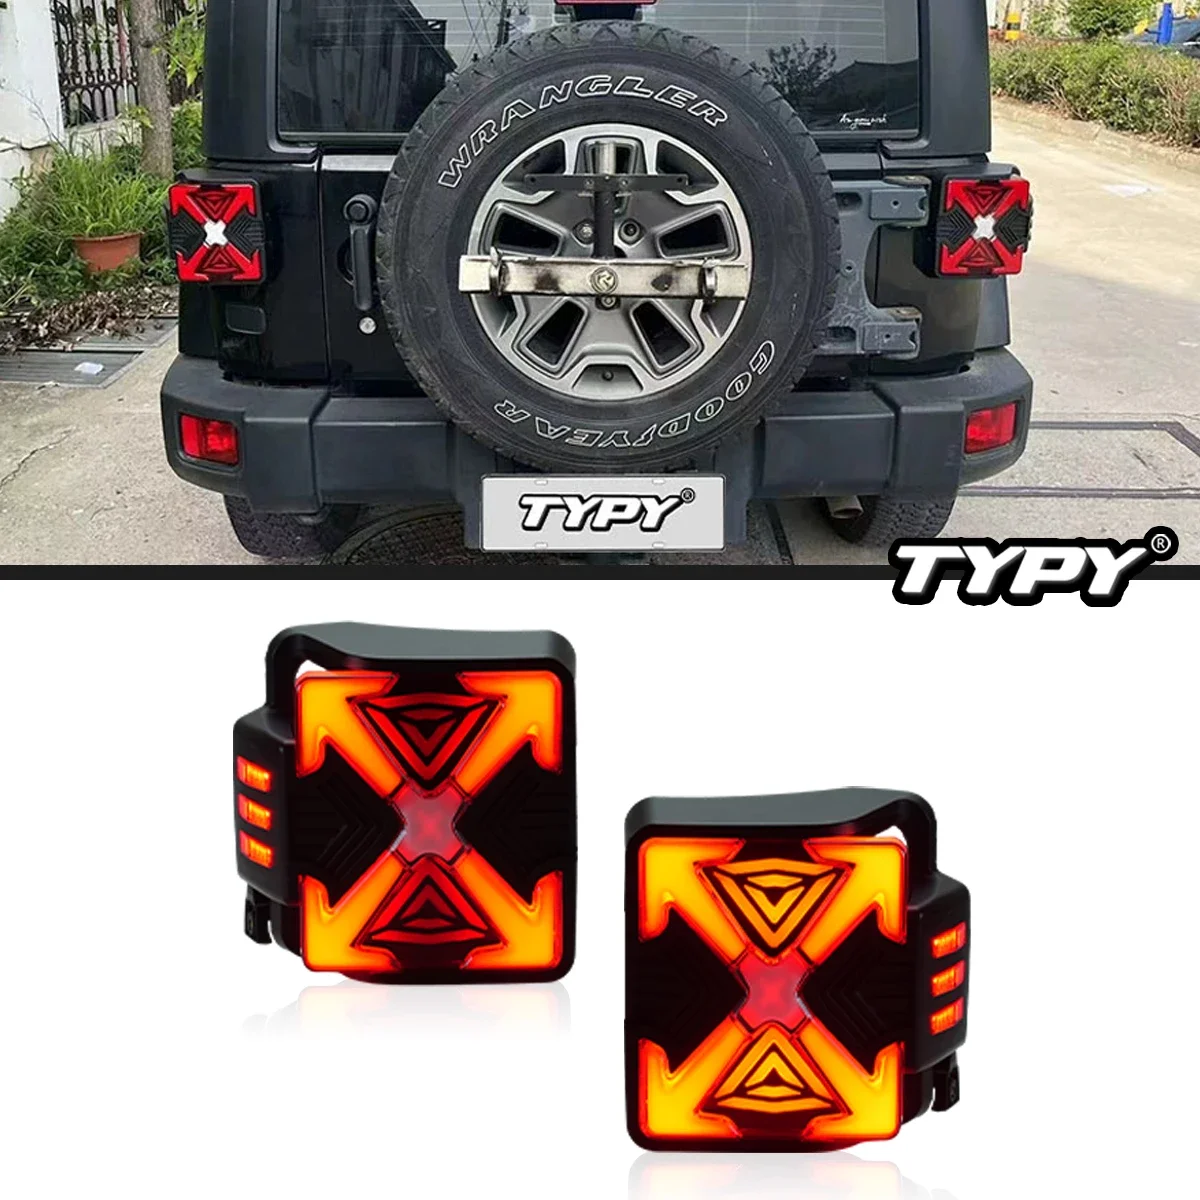 

TYPY Car Tail Lights For Jeep Wrangler 2006-2024 LED Car Tail Lamps Daytime Running Lights Dynamic Turn Signals